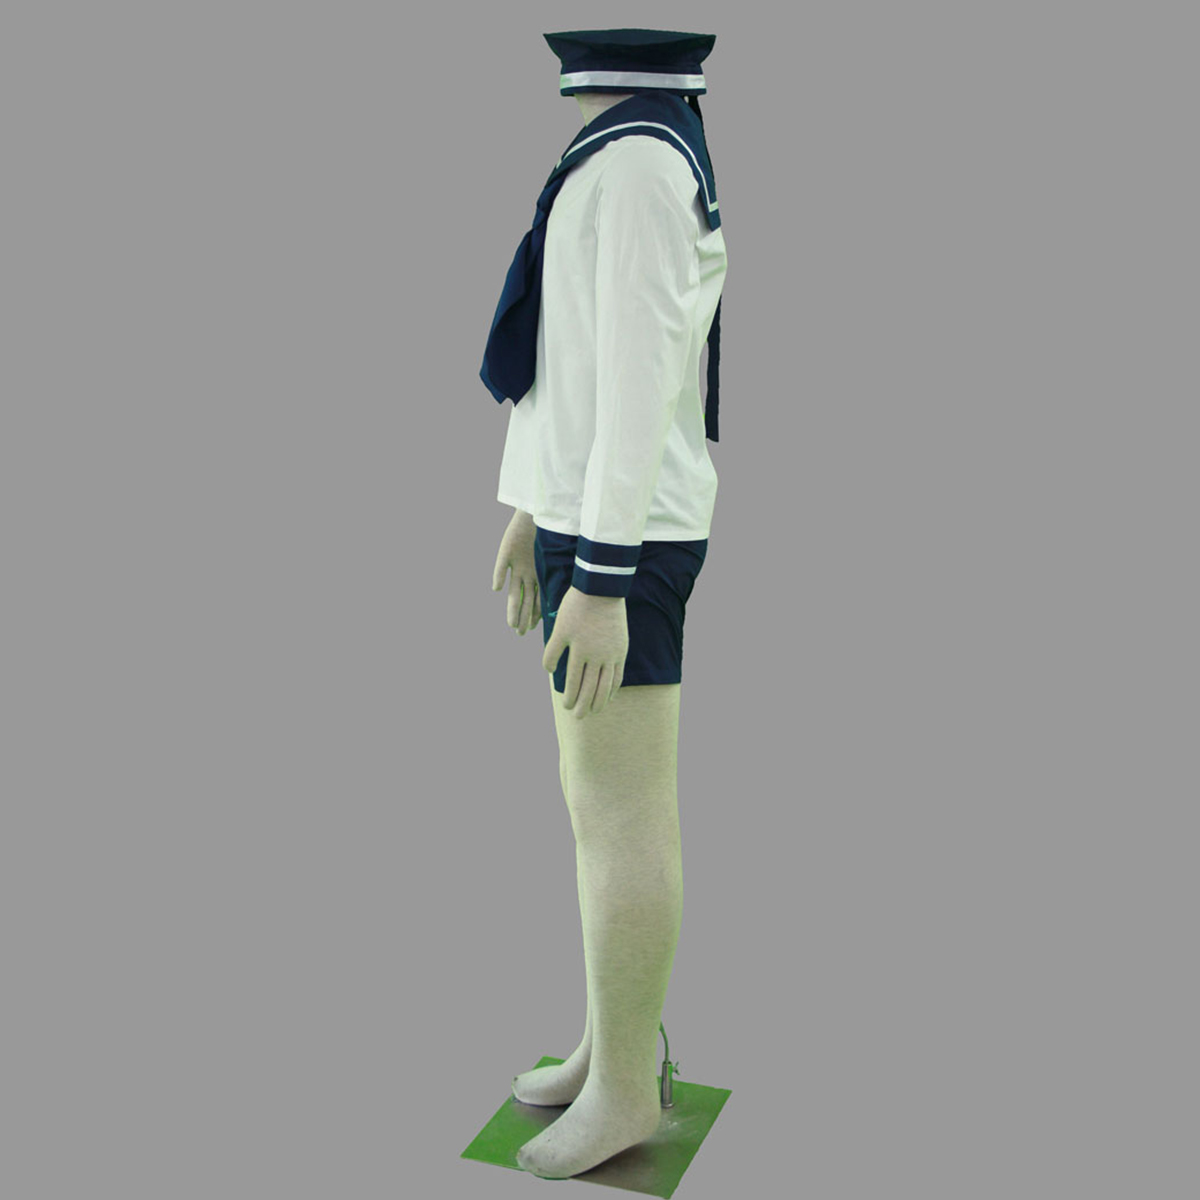 Axis Powers Hetalia North Italy Feliciano Vargas 1 Sailor Anime Cosplay Costumes Outfit